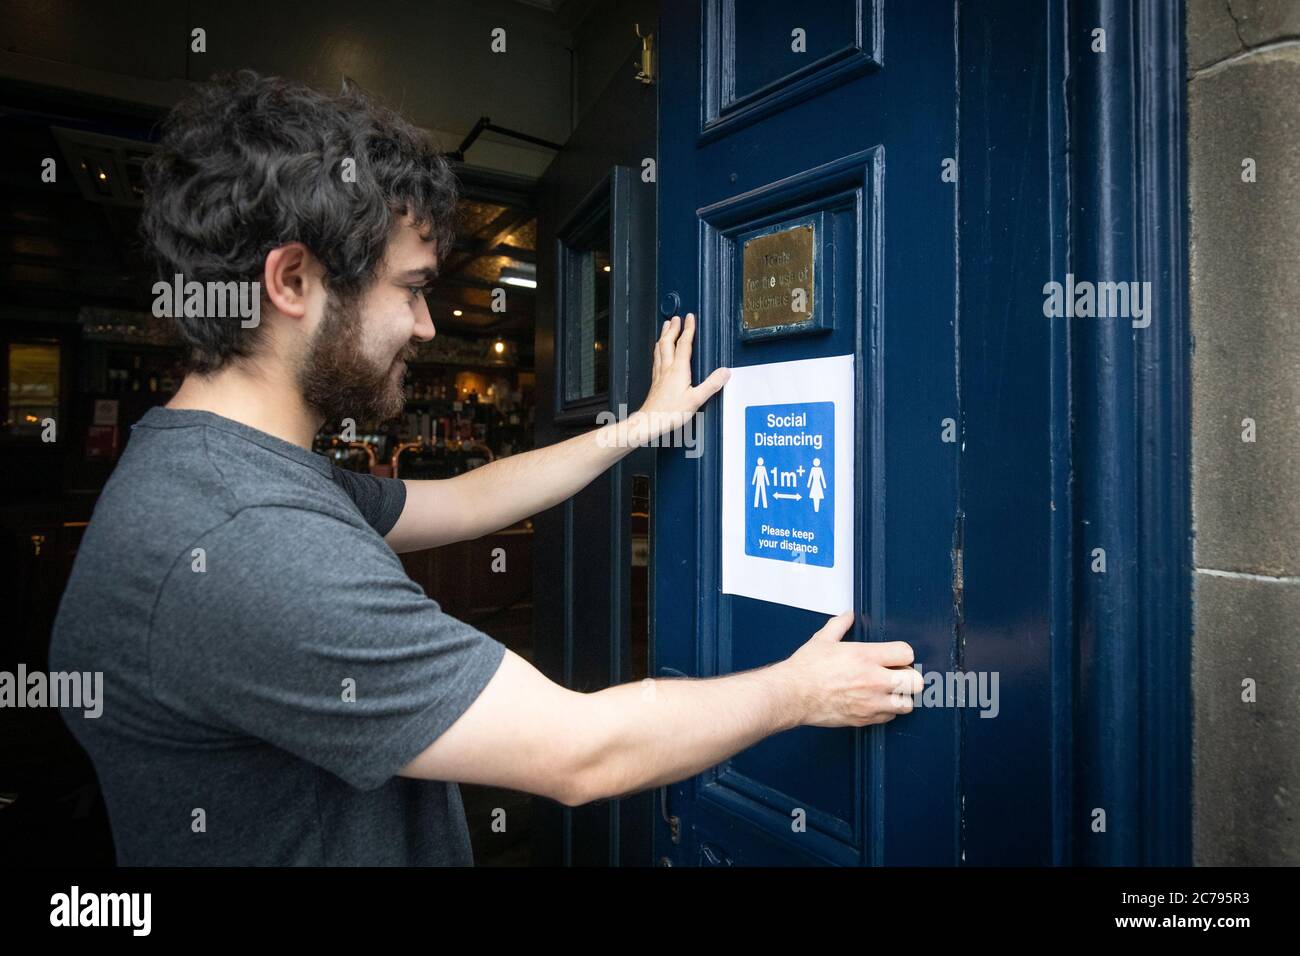 A member of staff places a safety sign on the door of The Scotsman's Lounge pub in Edinburgh as pubs, bars and restaurants across Scotland have opened indoor areas for the first time since March after the lifting of further coronavirus lockdown restrictions. Stock Photo